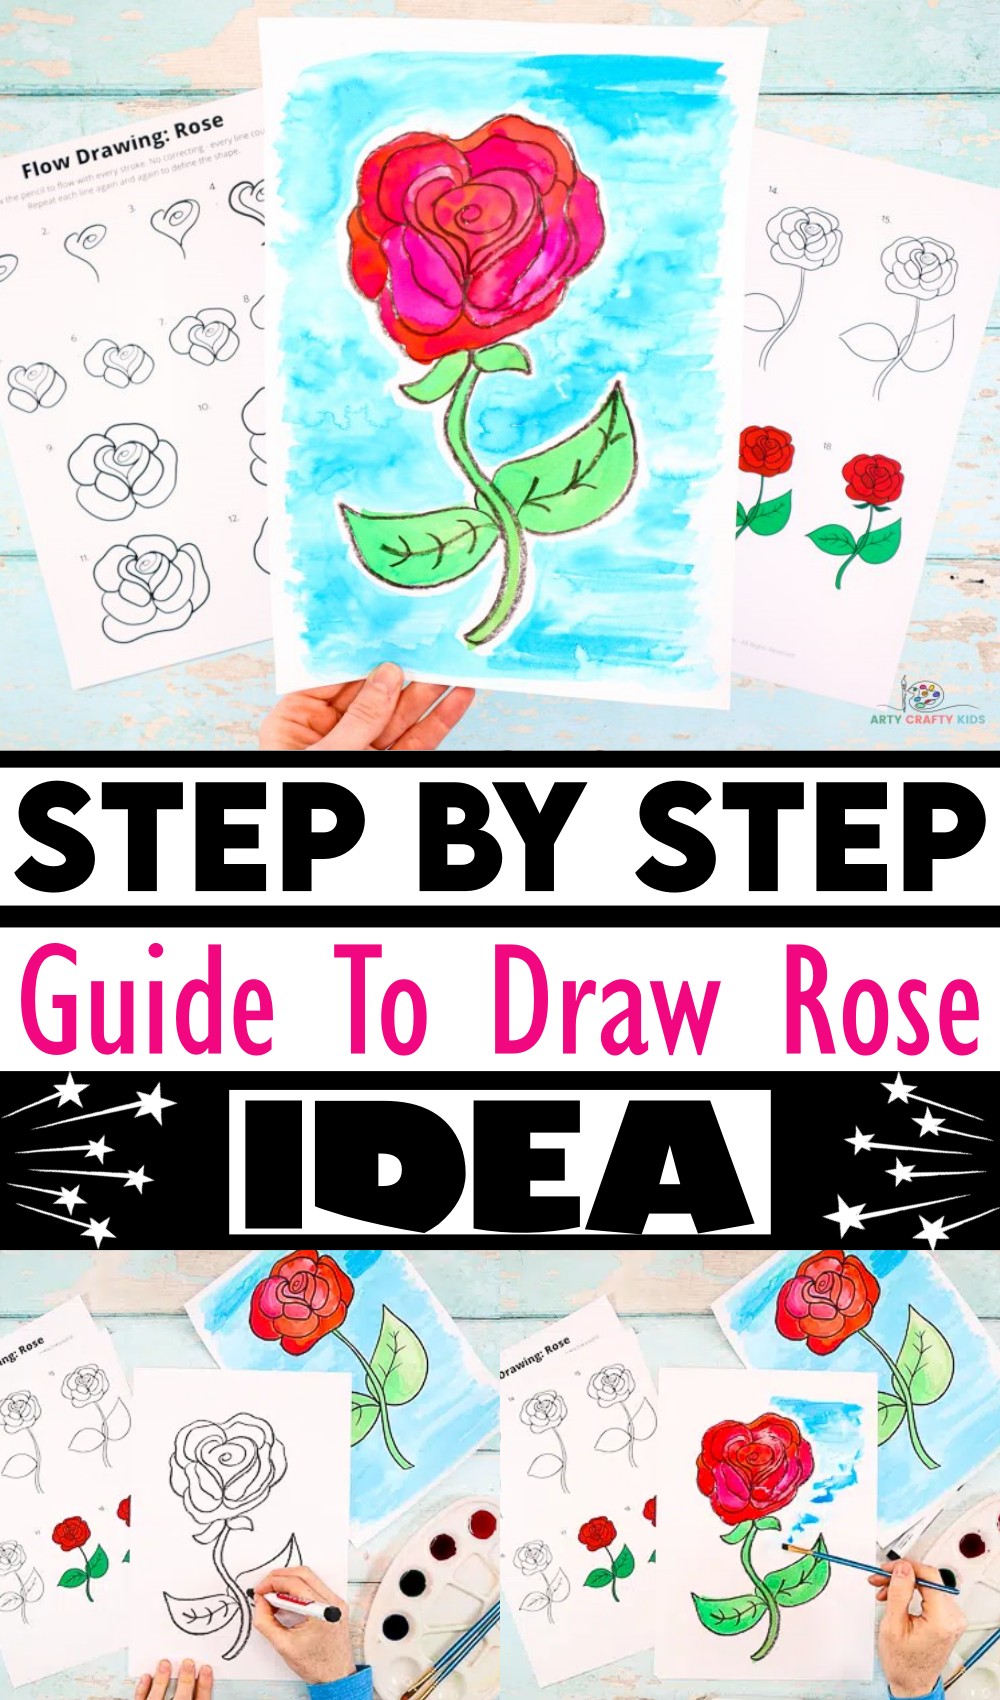 Step By Step Guide To Draw Rose